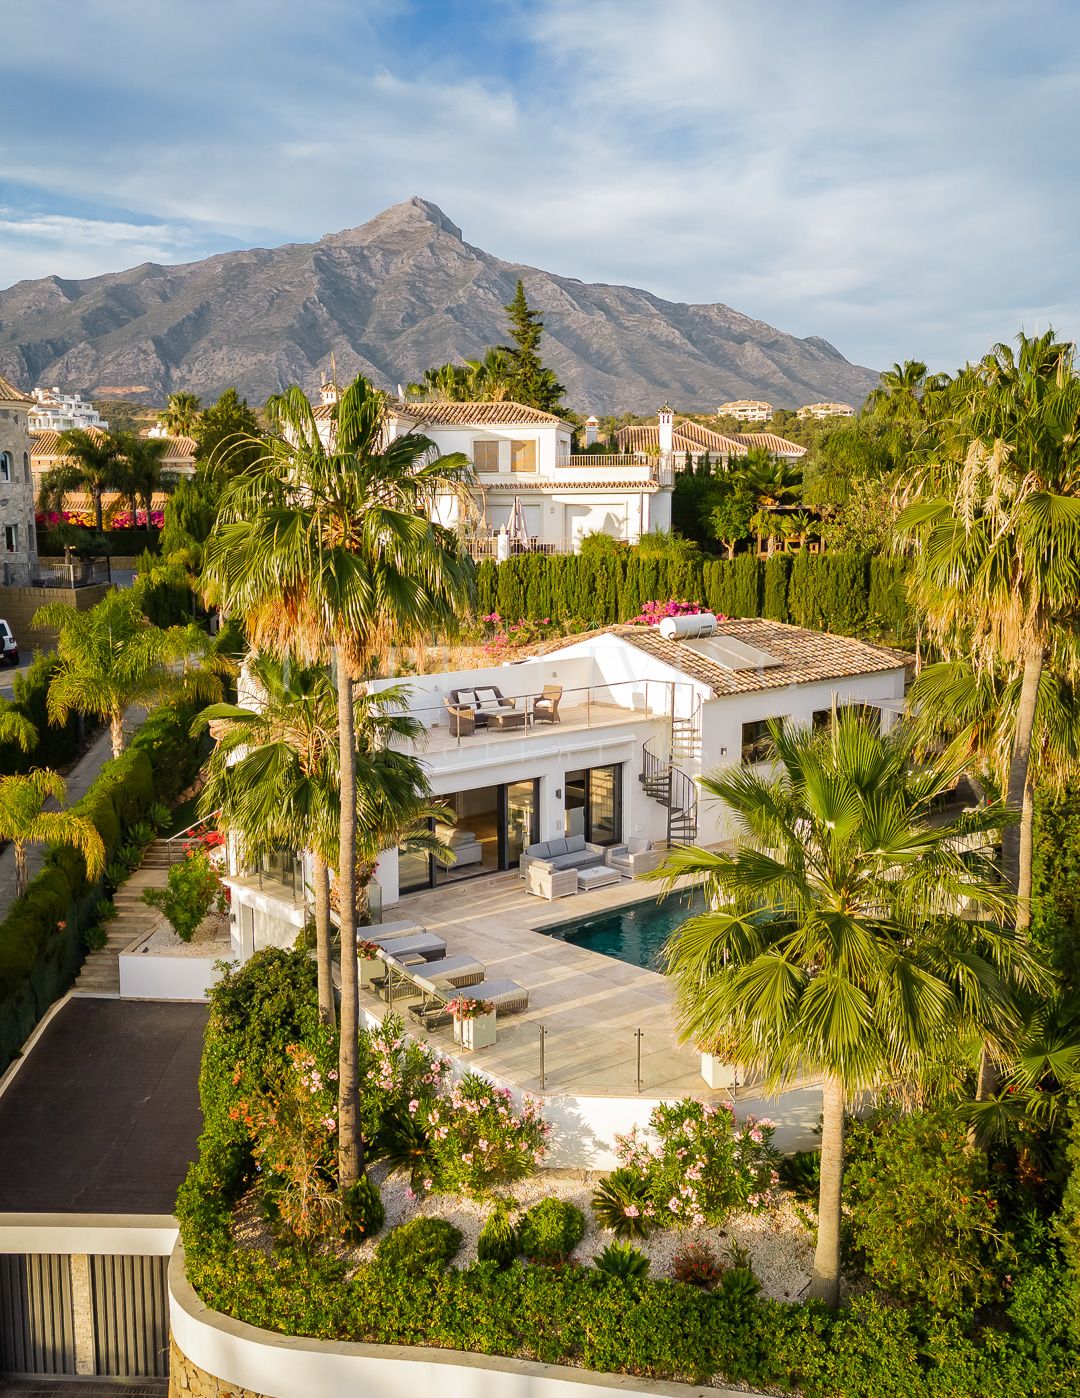 Luxurious family home in Nueva Andalucia, recently refurbished to high standards.